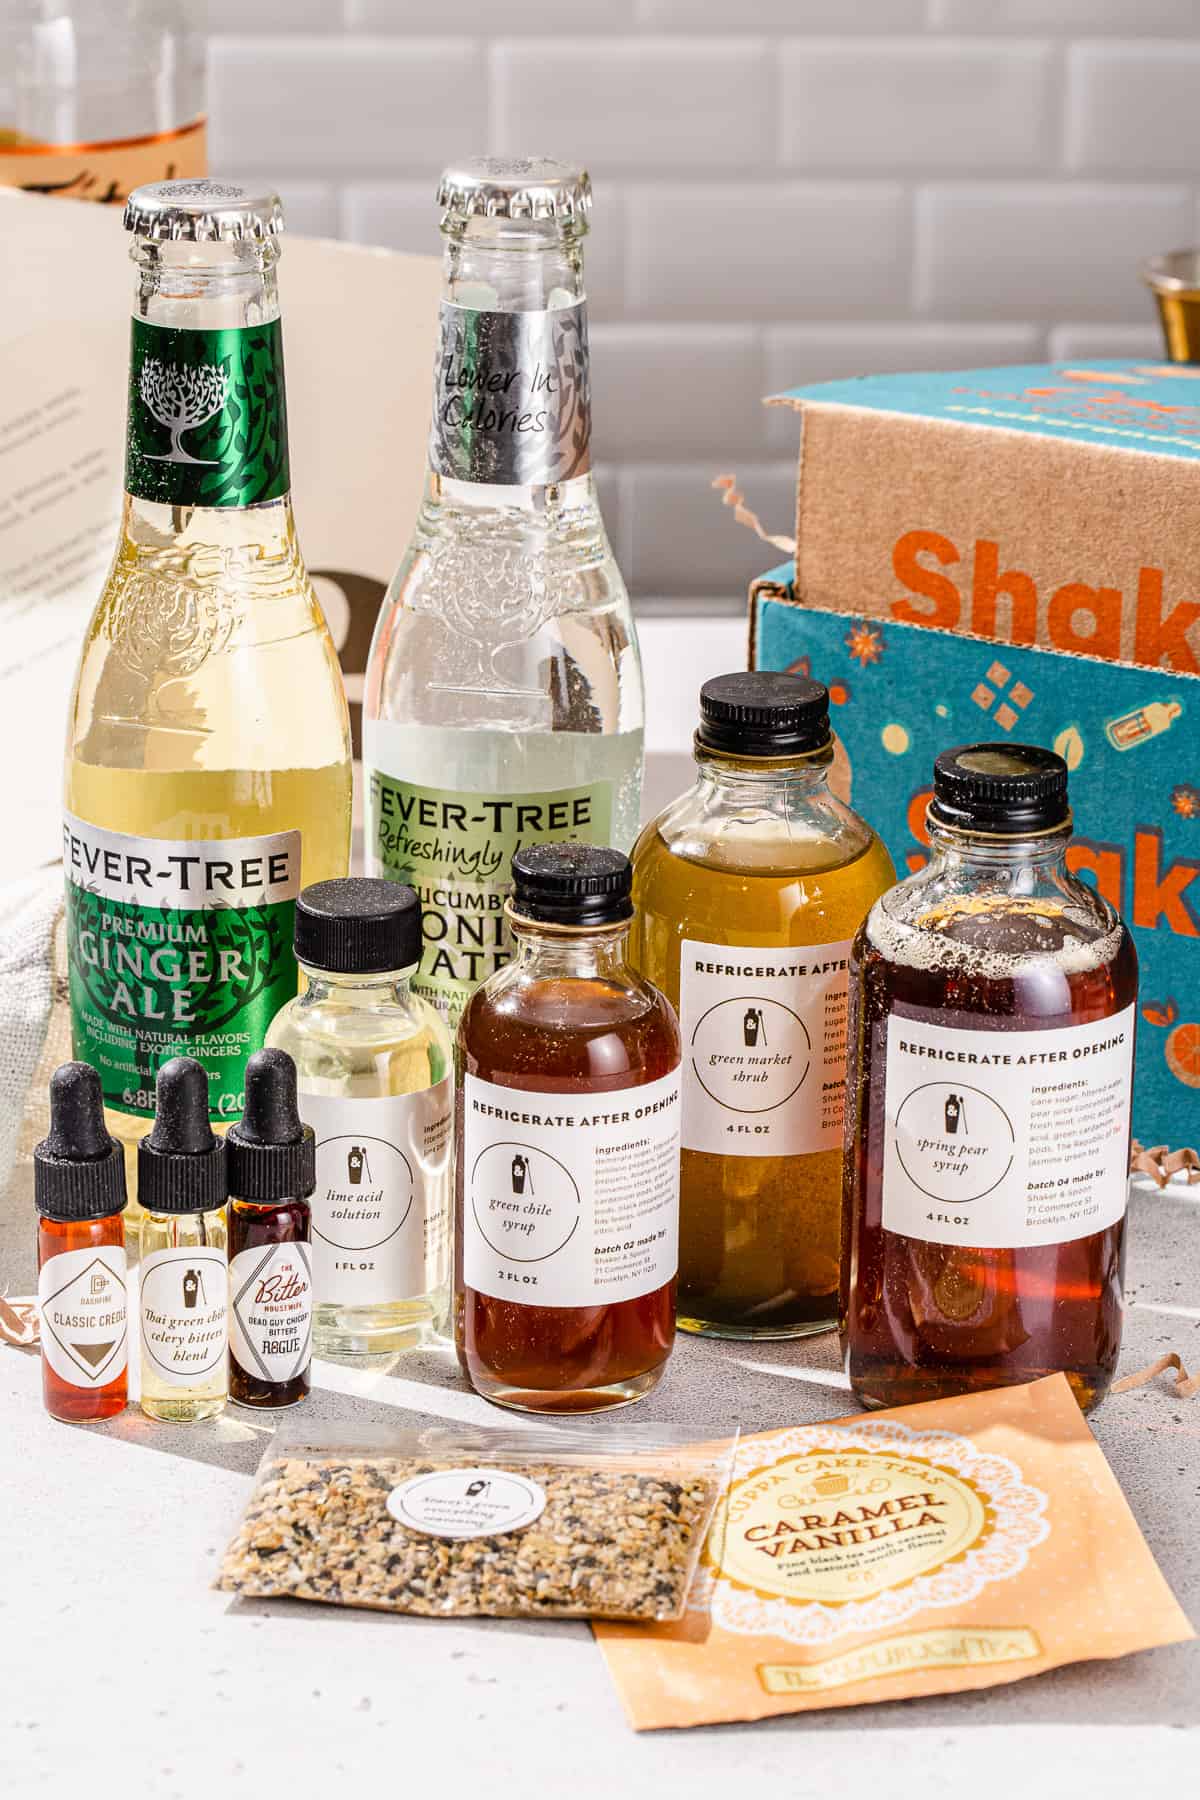 All of the contents of the Shaker & Spoon Vodka Brunch box together on a countertop.